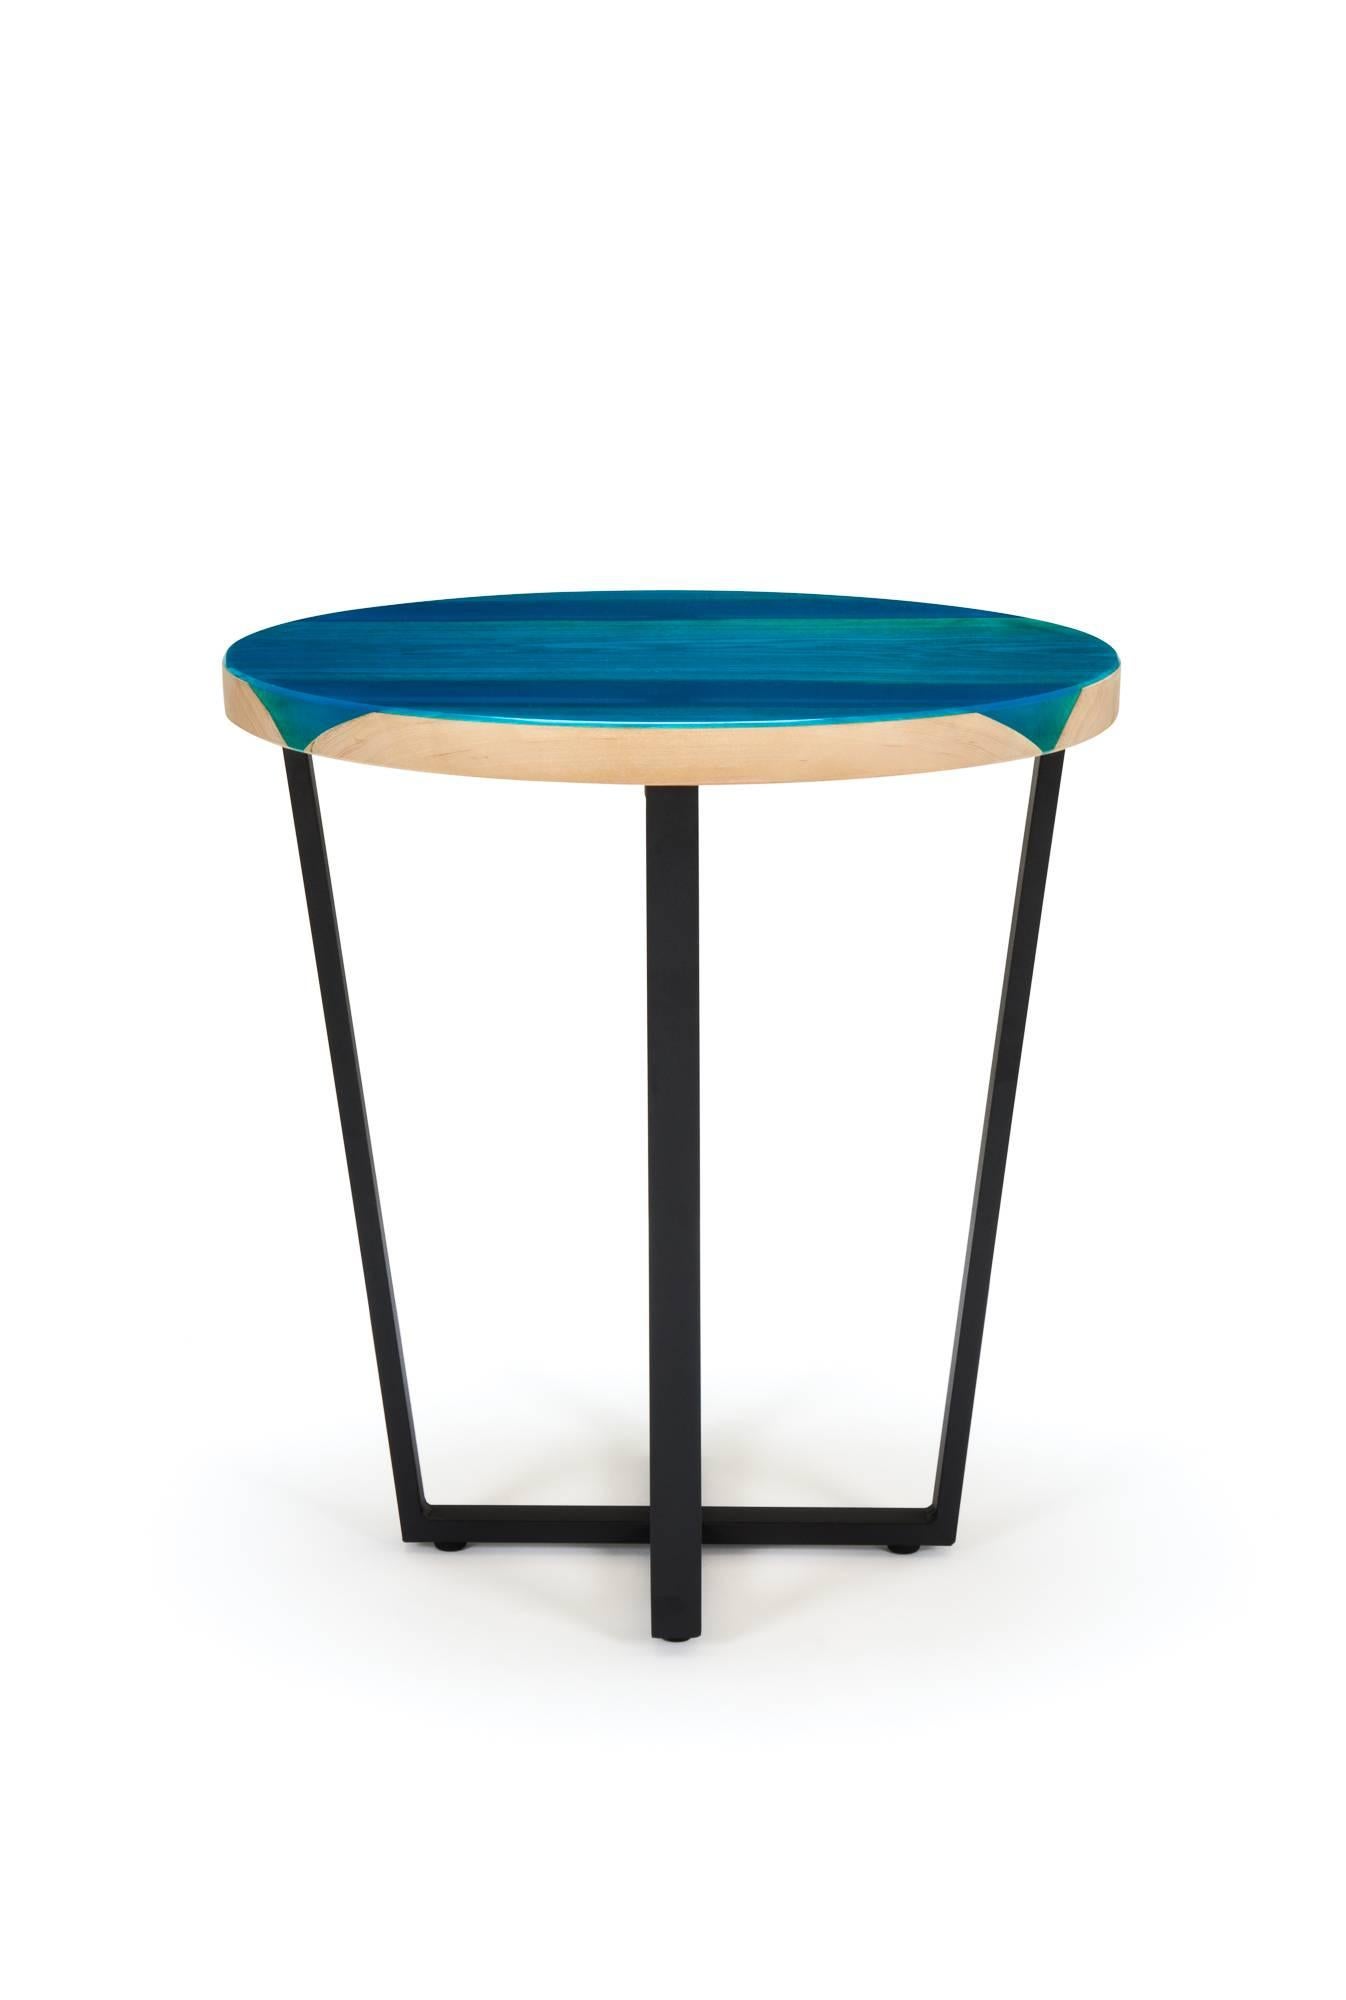 This round side table features English Ash encased and glazed with blue resin. The high gloss resin across the top of the ash brings the grain to life, while at the same time contrasts perfectly with the light colored end grain. The black powder